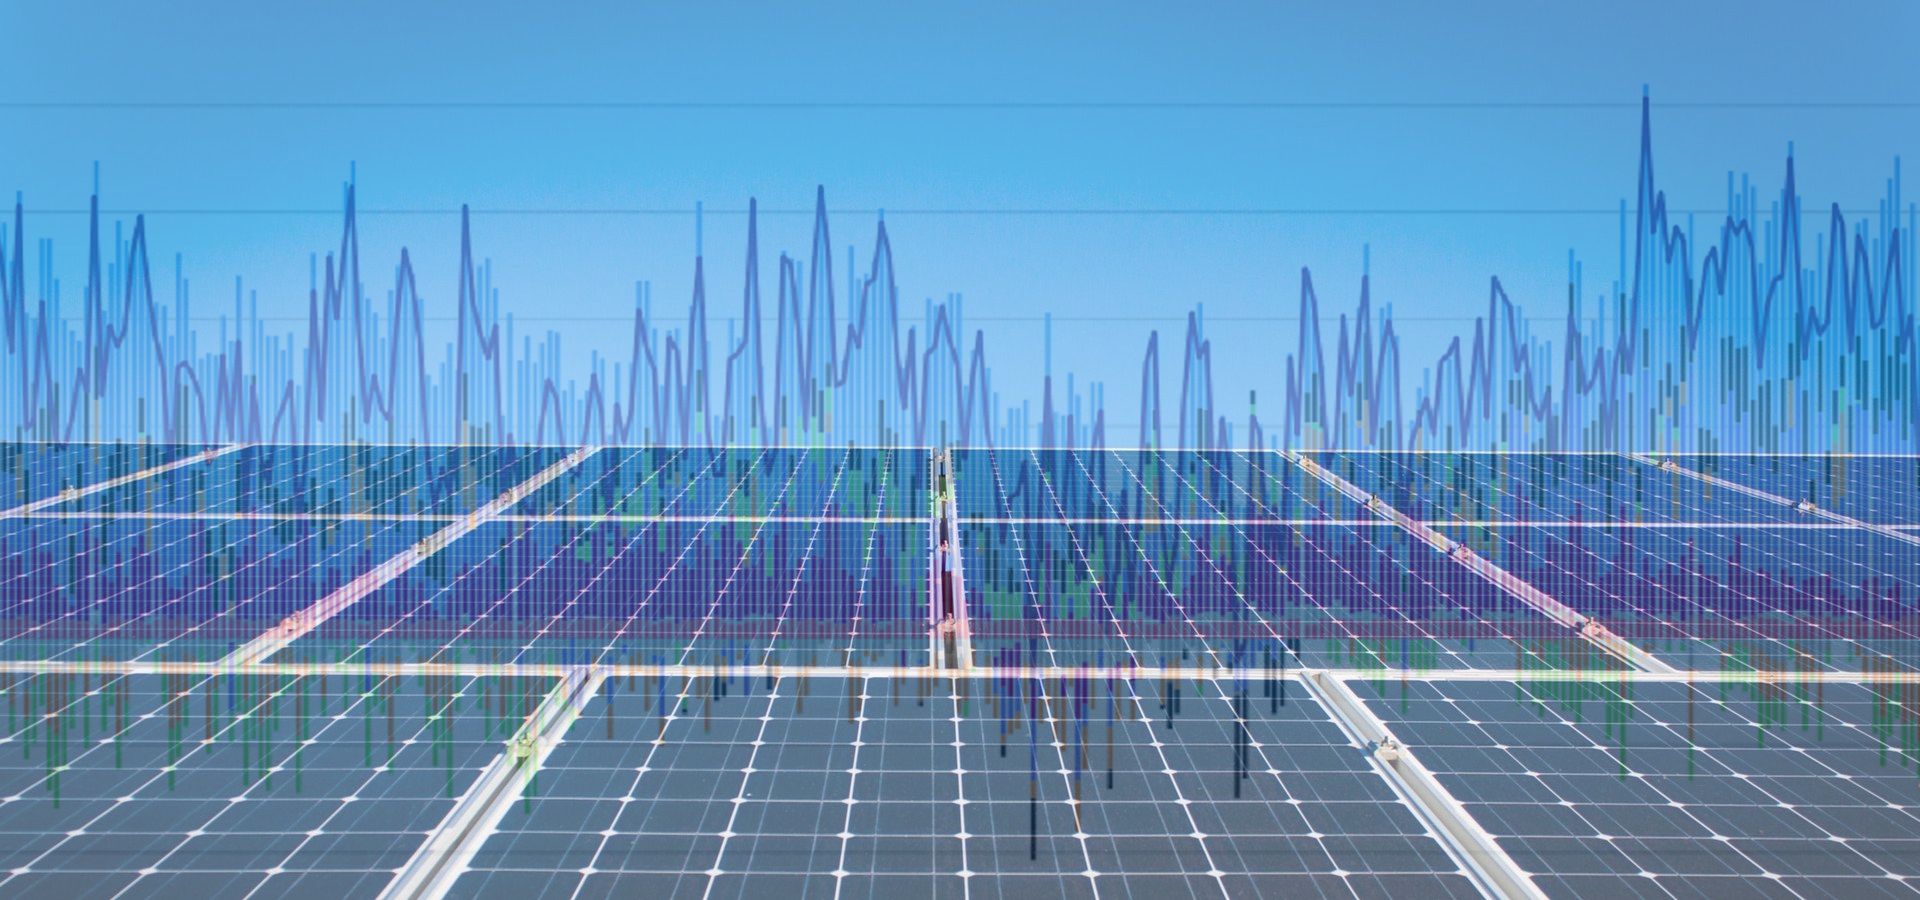 picture of solar panels overlayed with a graph of fluctuating energy costs